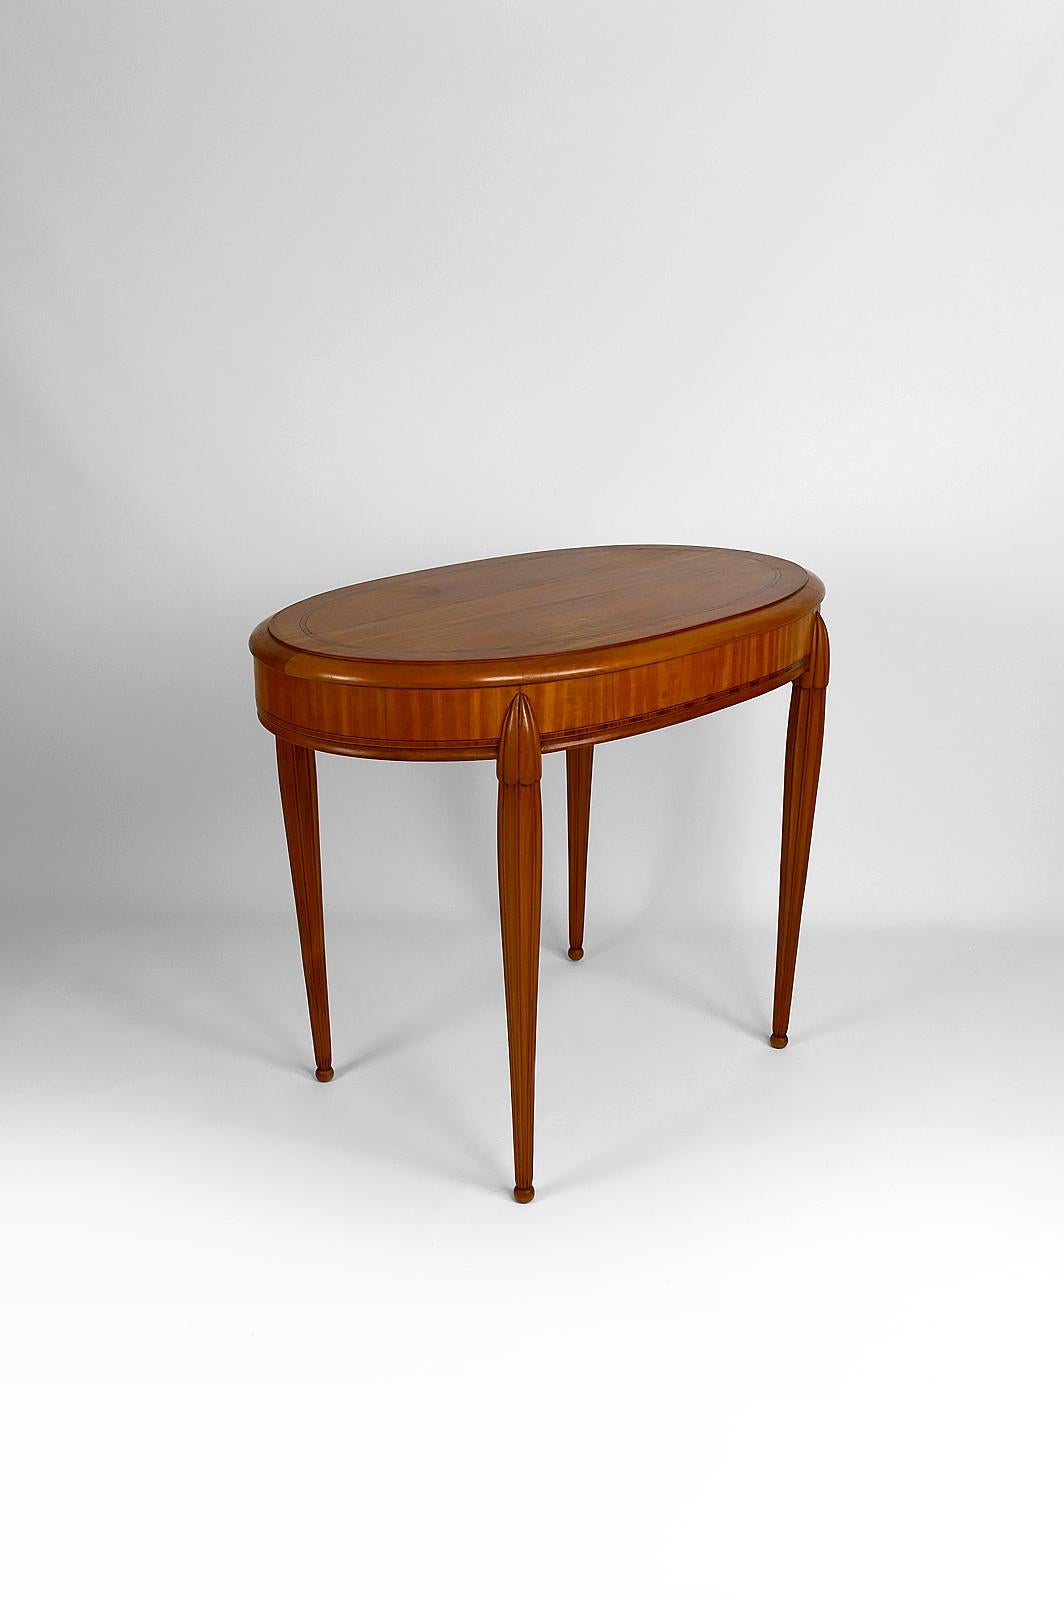 Inlay Art Deco Oval Pedestal Table with Marquetry, France, circa 1920